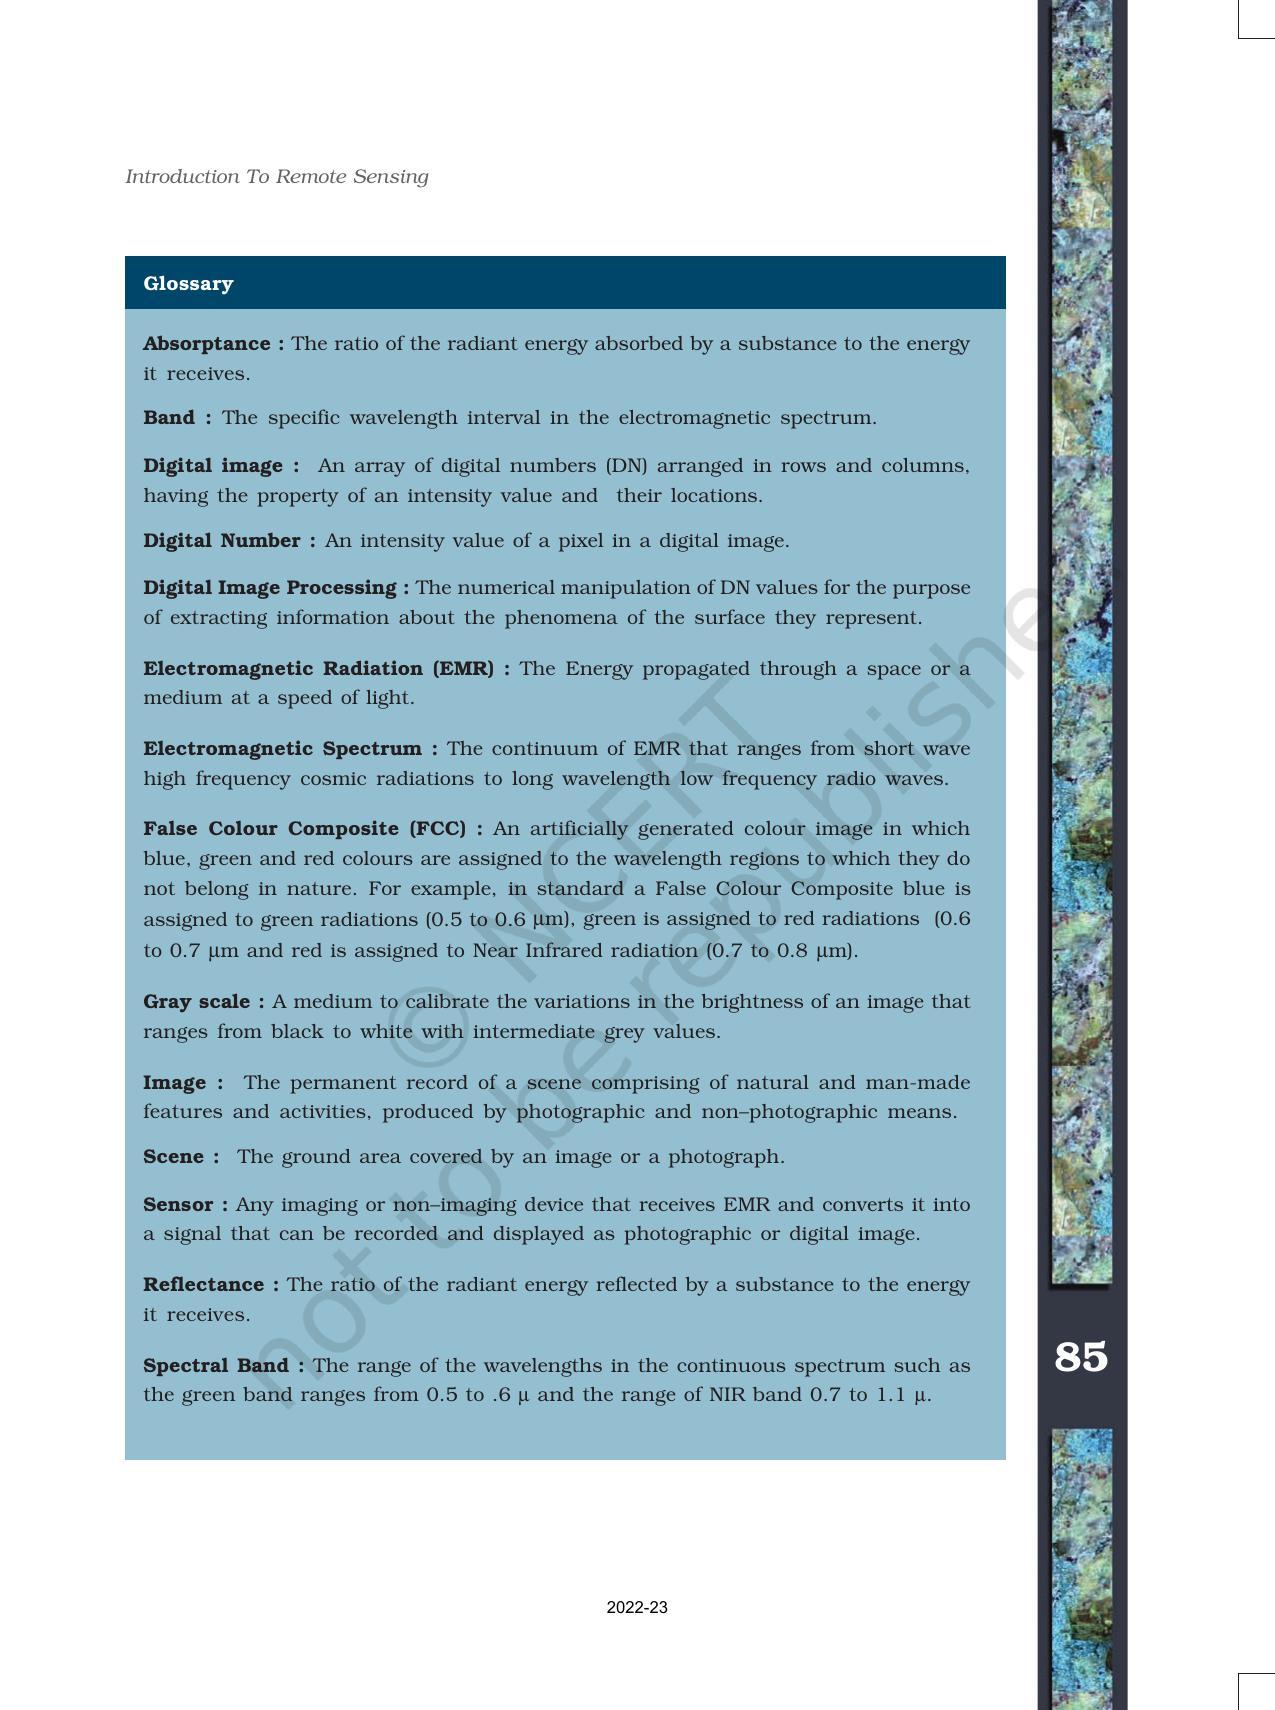 NCERT Book for Class 11 Geography (Part-III) Chapter 7 Introduction to Remote Sensing - Page 2